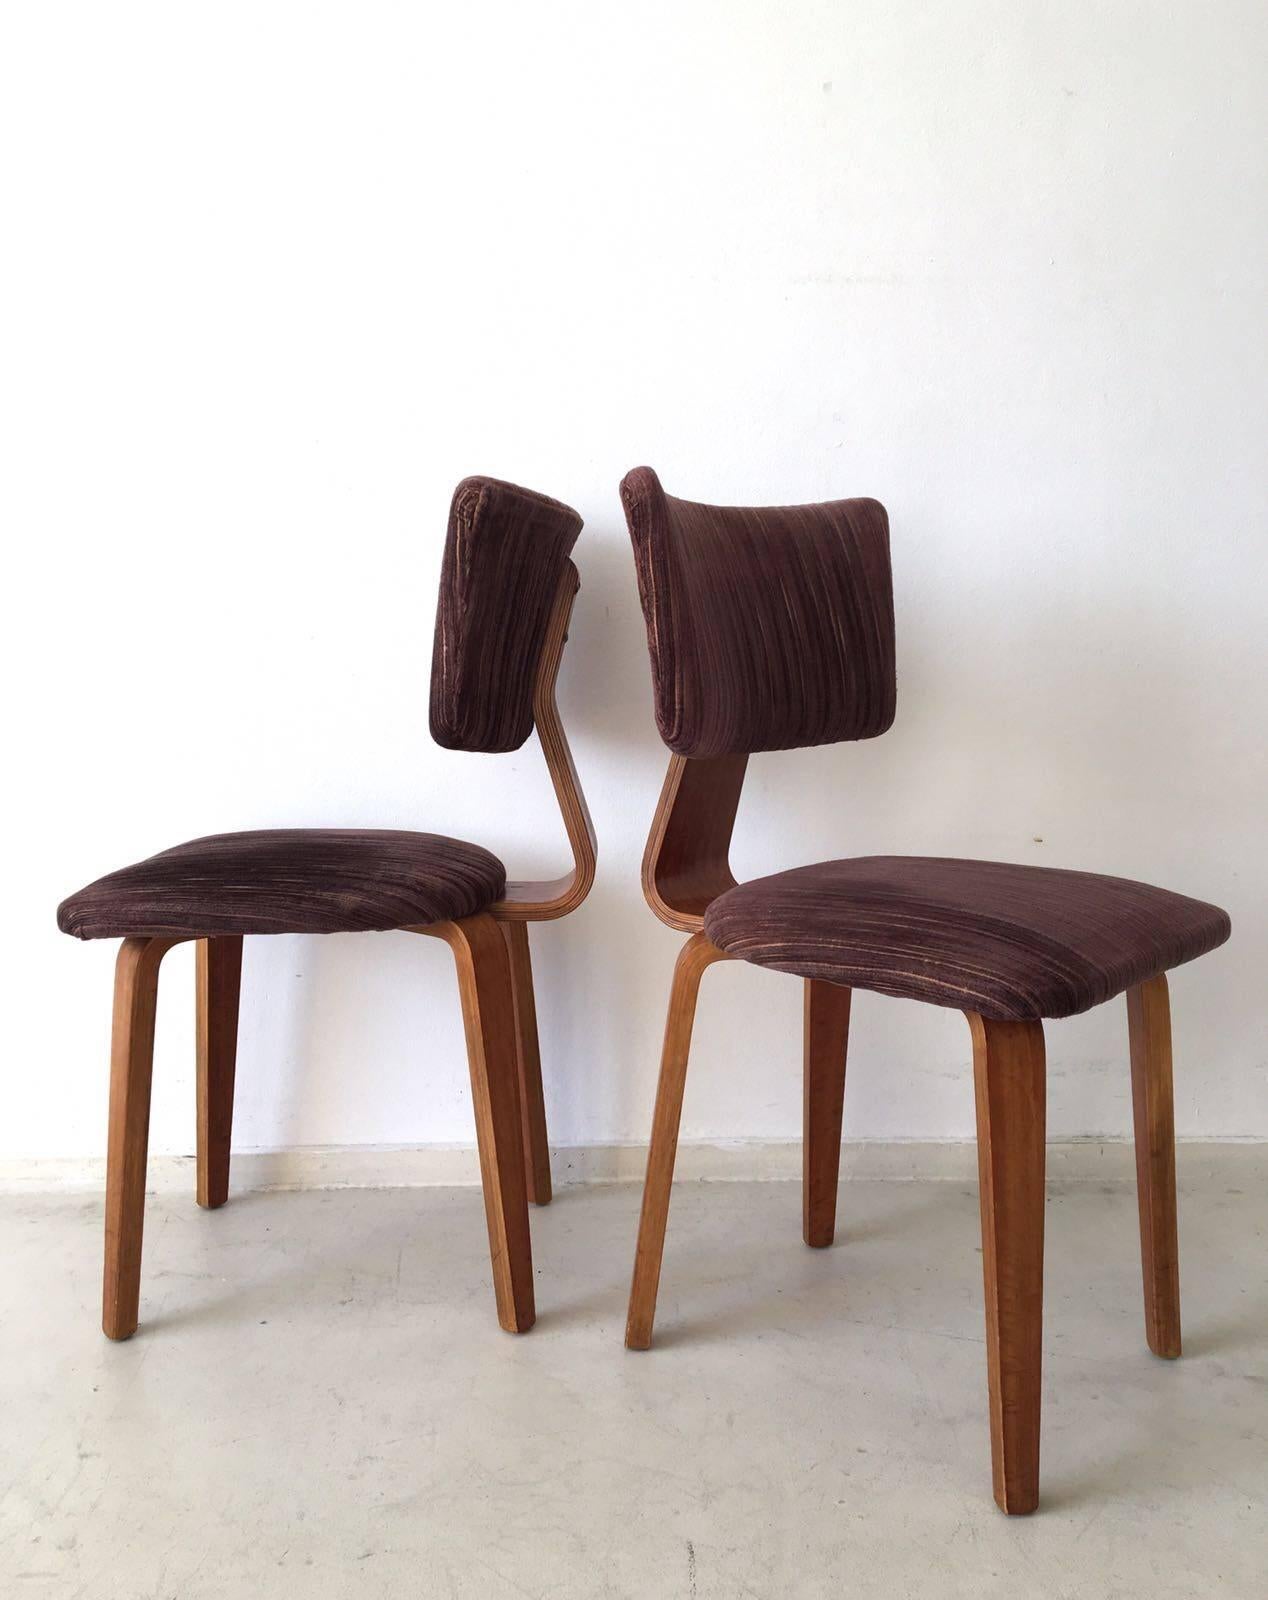 Dutch Mid-Century Dining Chairs by Cor Alons for den Boer Gouda, 1949